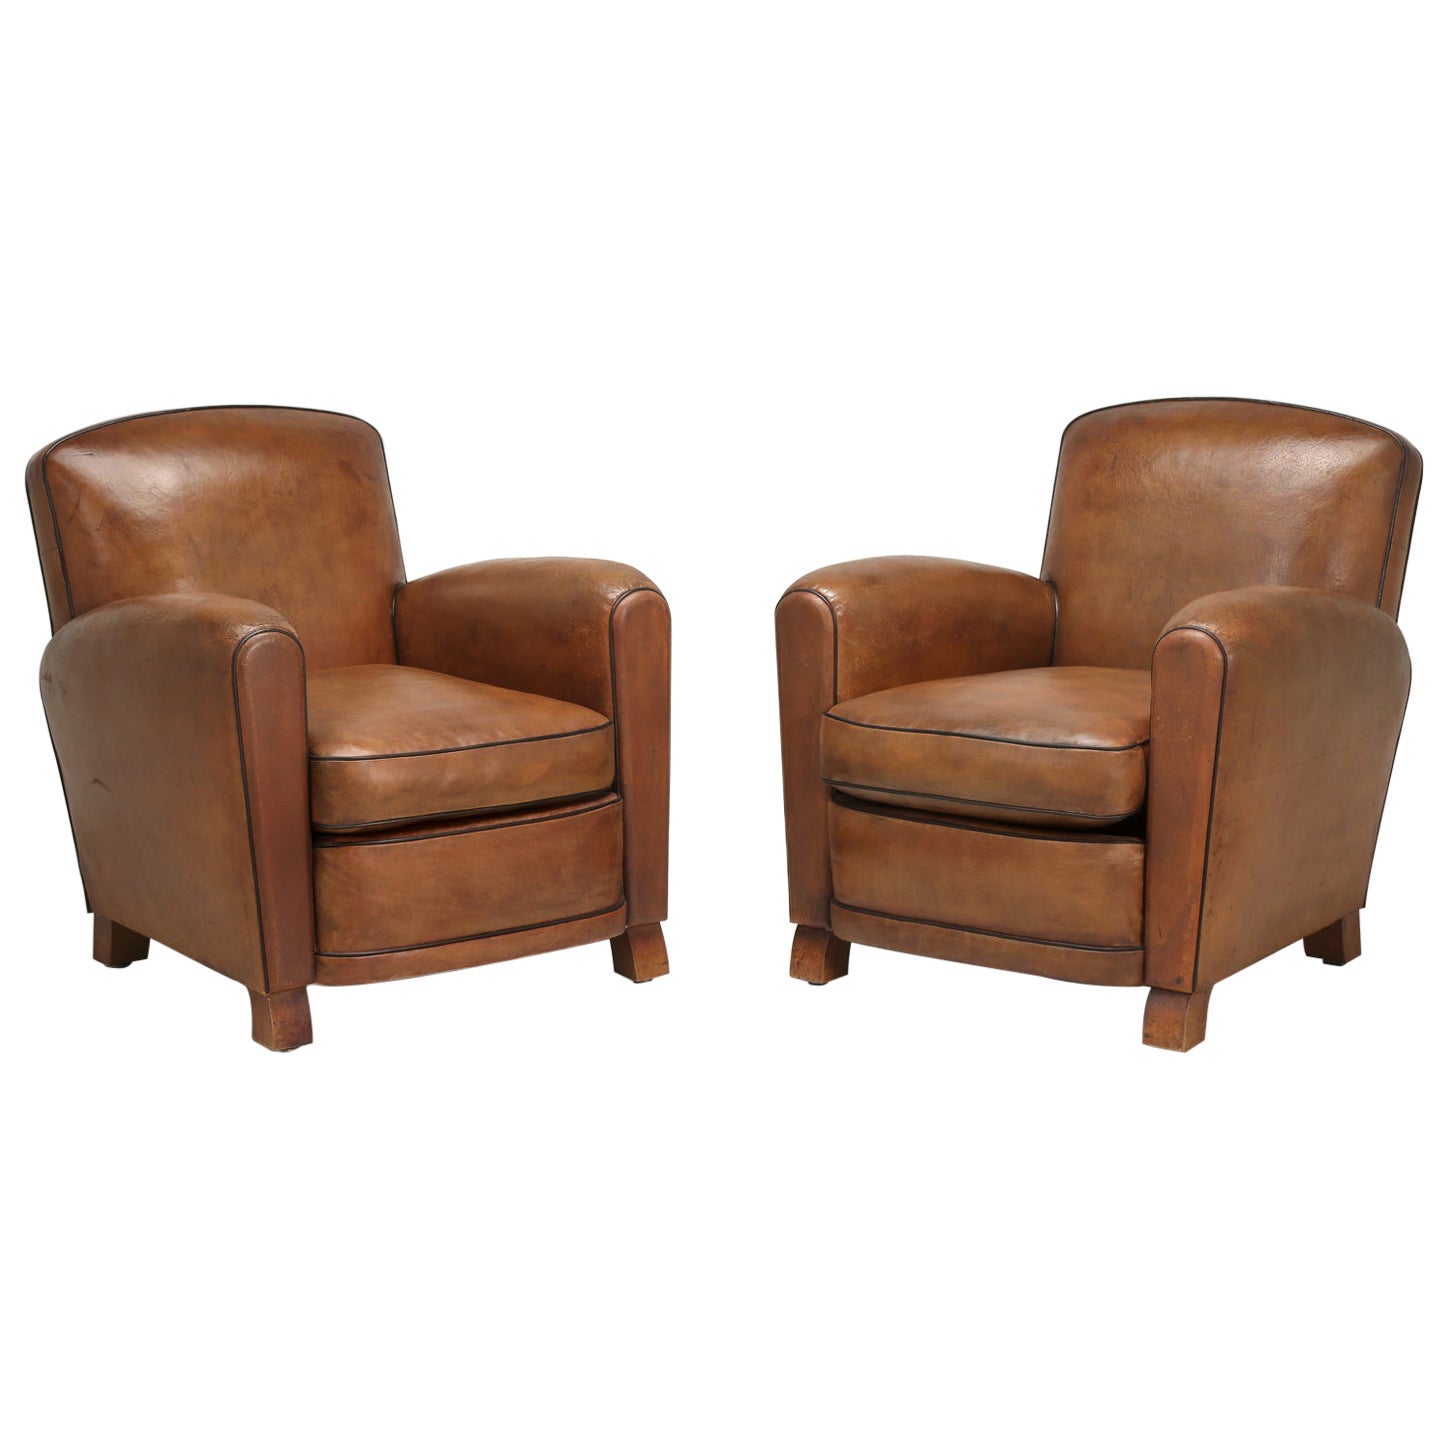 French Leather Club Chairs Thoroughly Restored